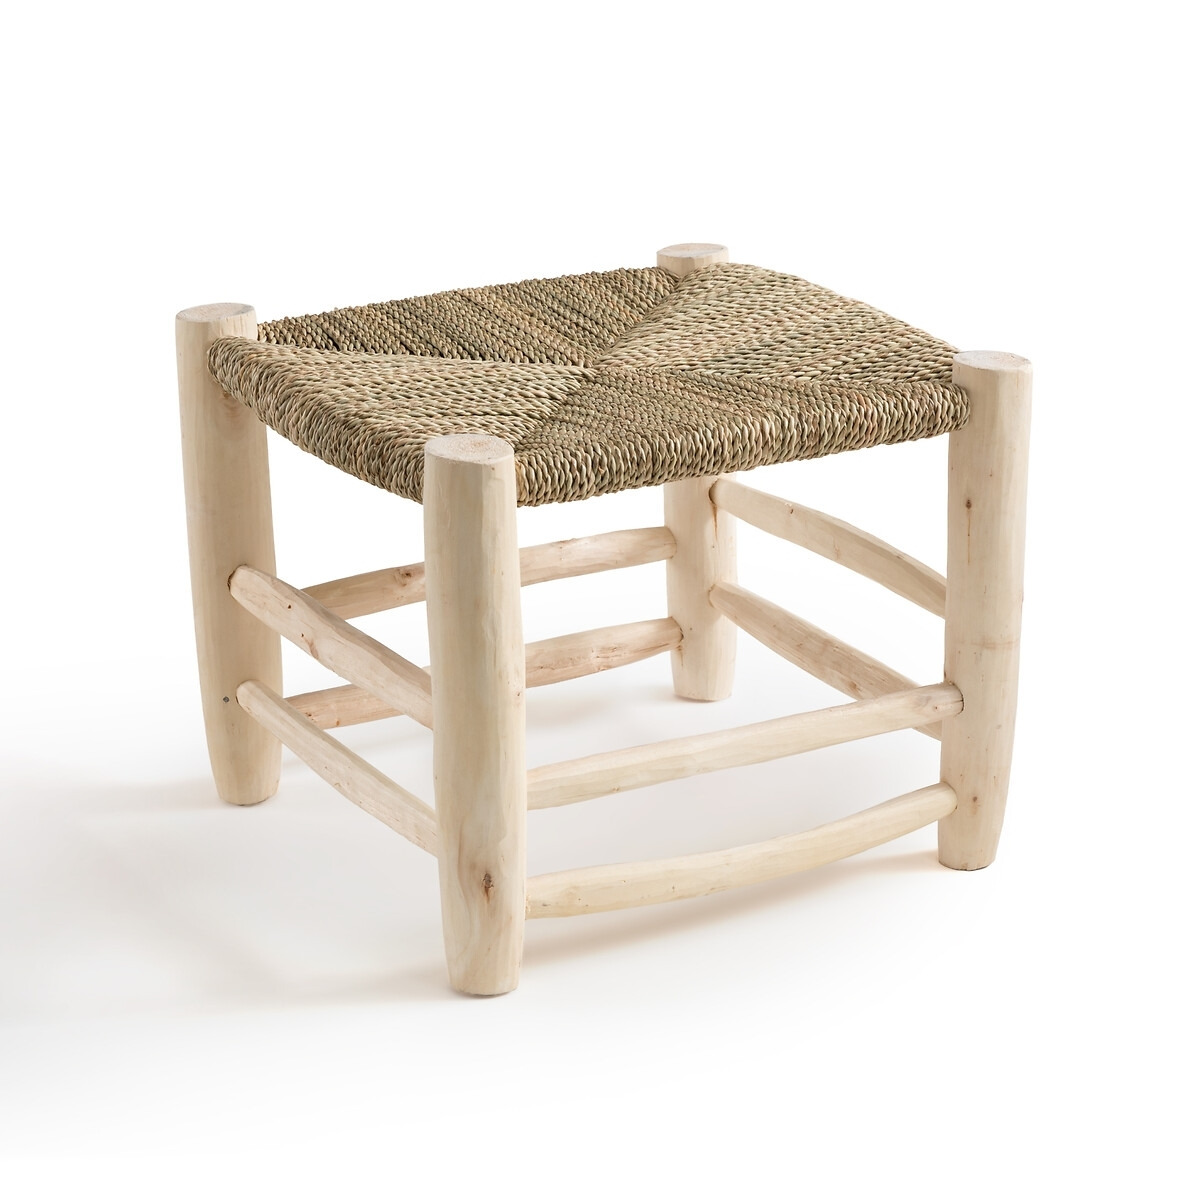 Ghada Moroccan Style Wooden Low Stool - image 1